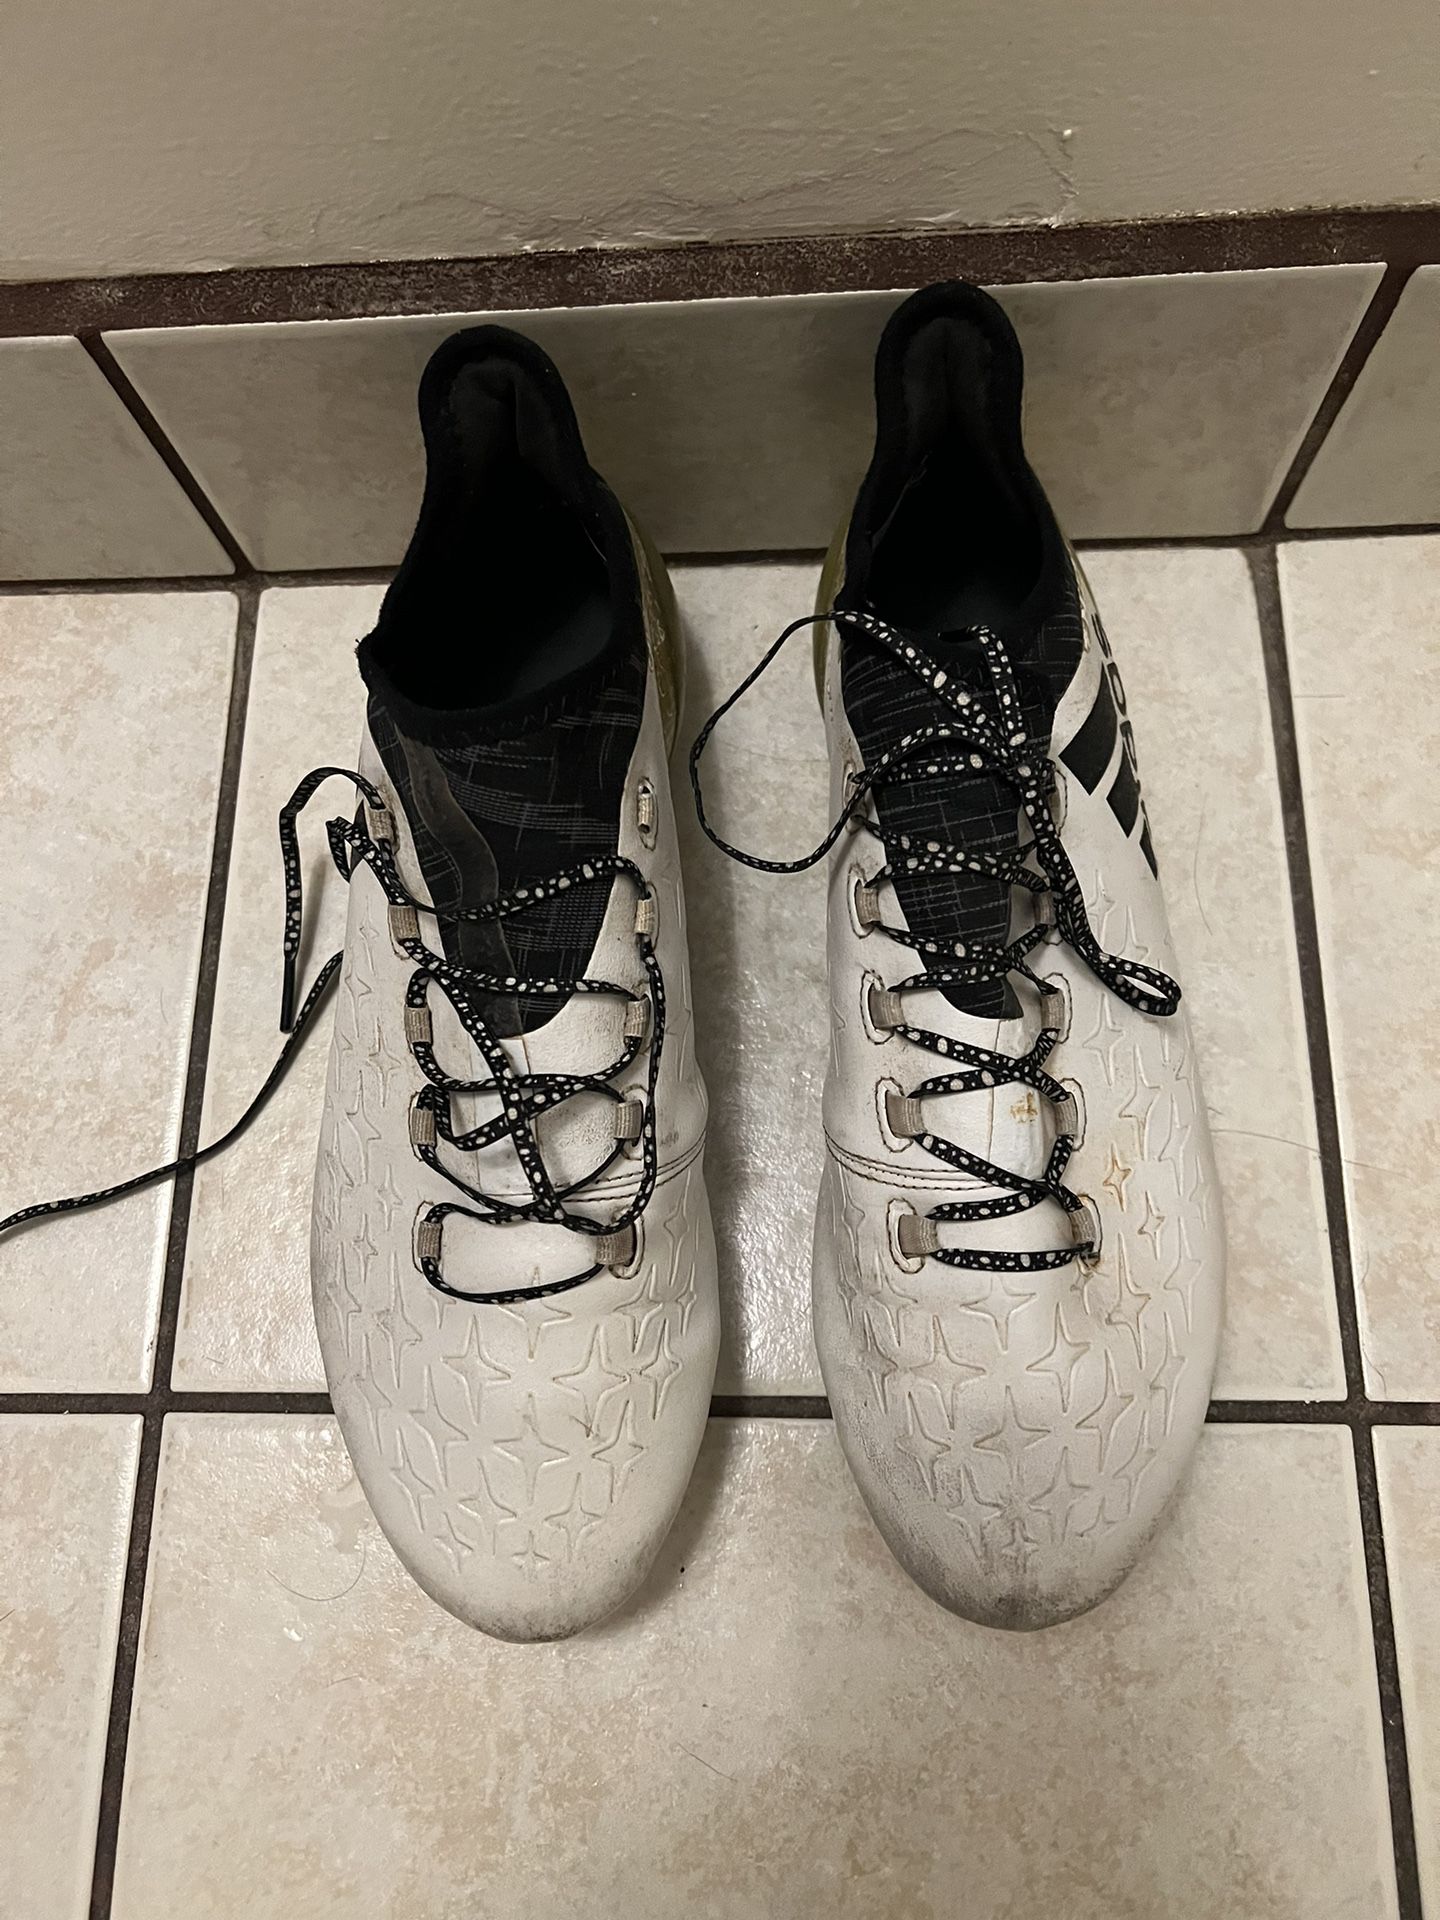 aniversario Parcial sutil Adidas X16.1 Stellar Pack for Sale in Long Beach, CA - OfferUp